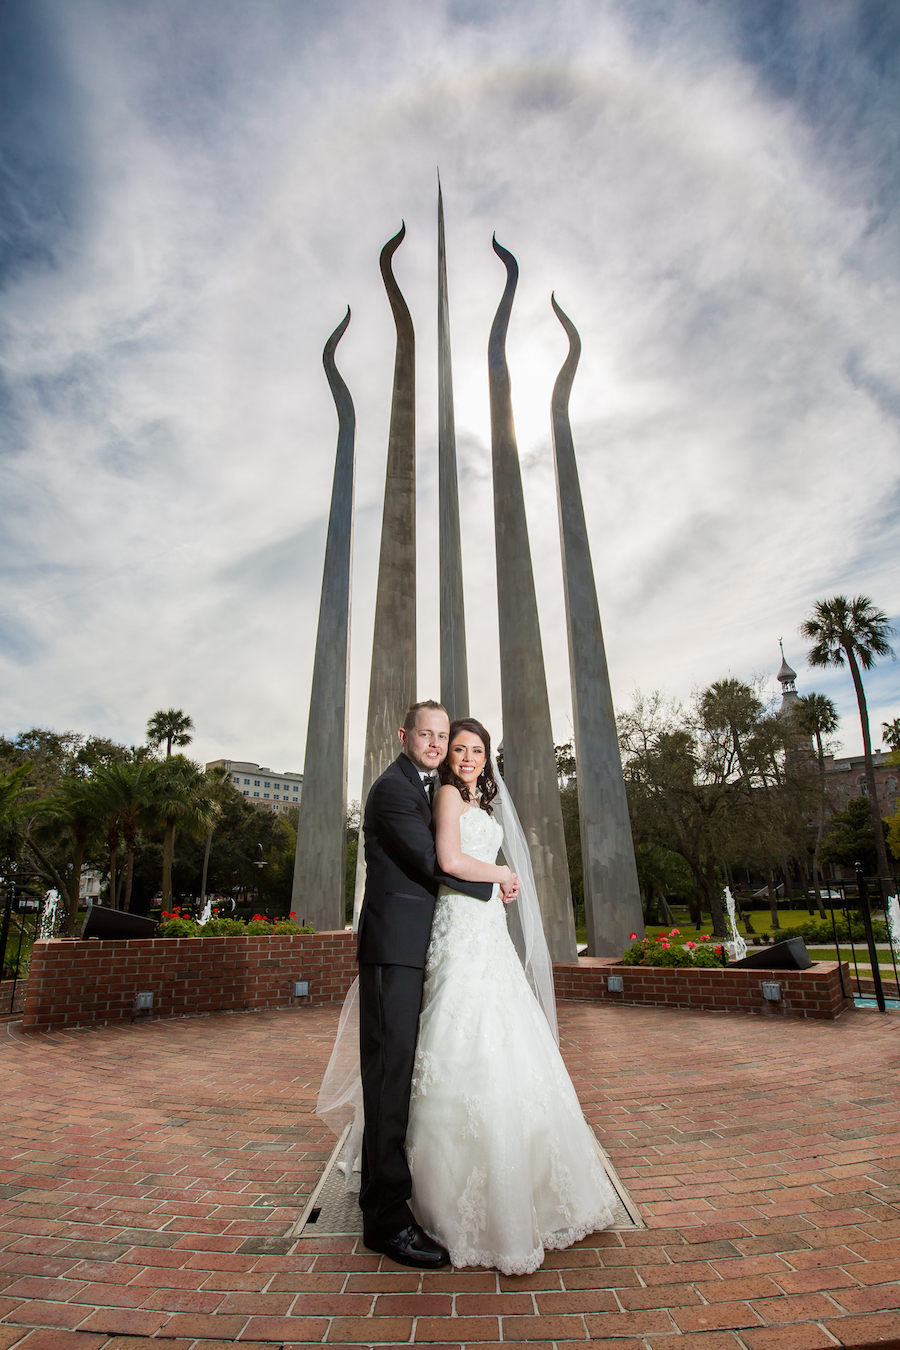 Outdoor, Bride and Groom Wedding Portrait with Sculpture at University of Tampa